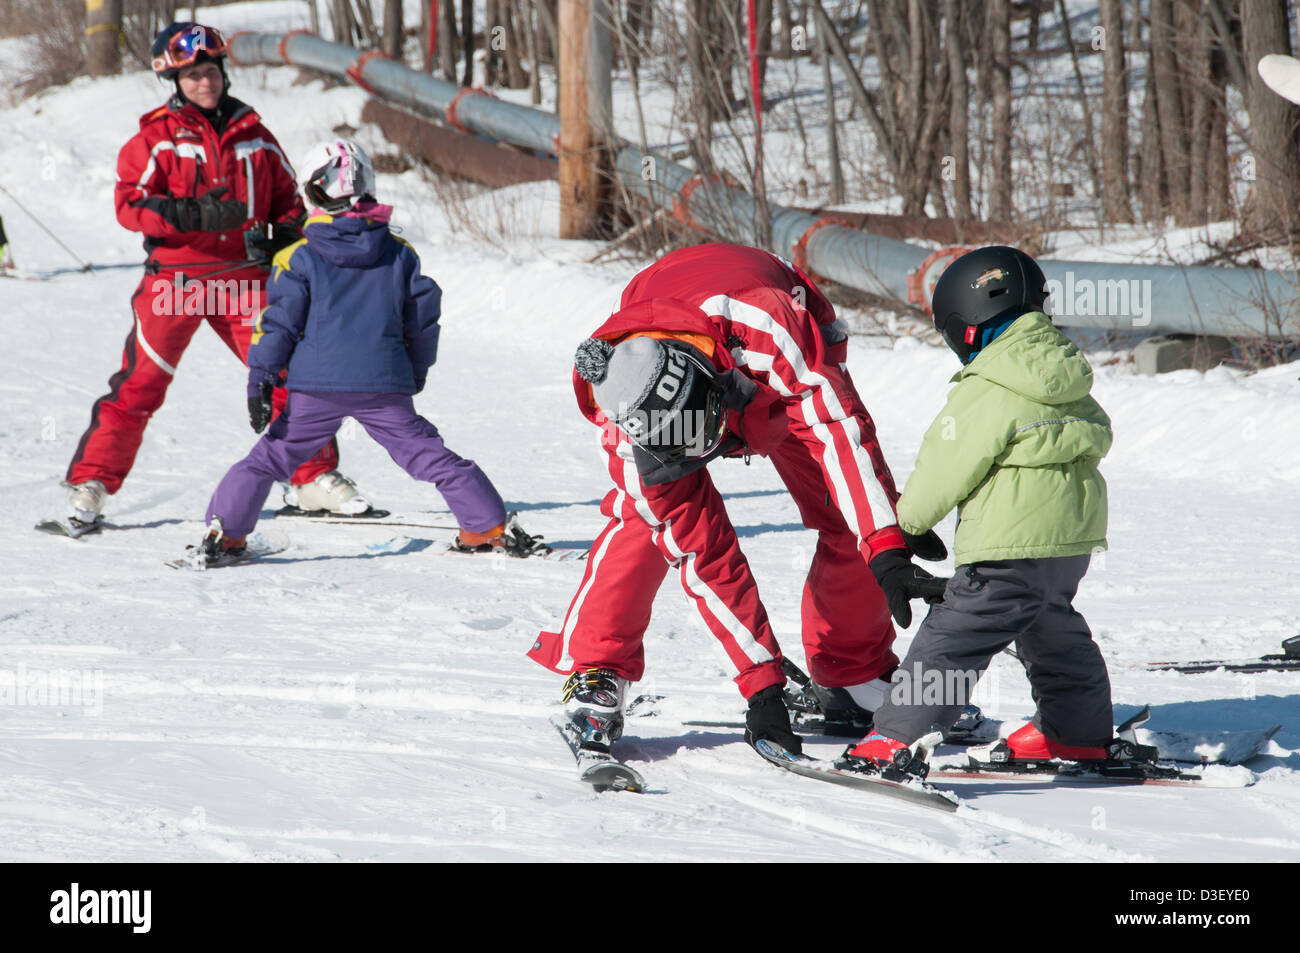 First Ski lesson of Alix, a three years old from Montreal who came with his parents for his first  private ski lesson The Ski Saint Bruno station open since 1965 has had 500 000 students graduating from its ski school. Stock Photo